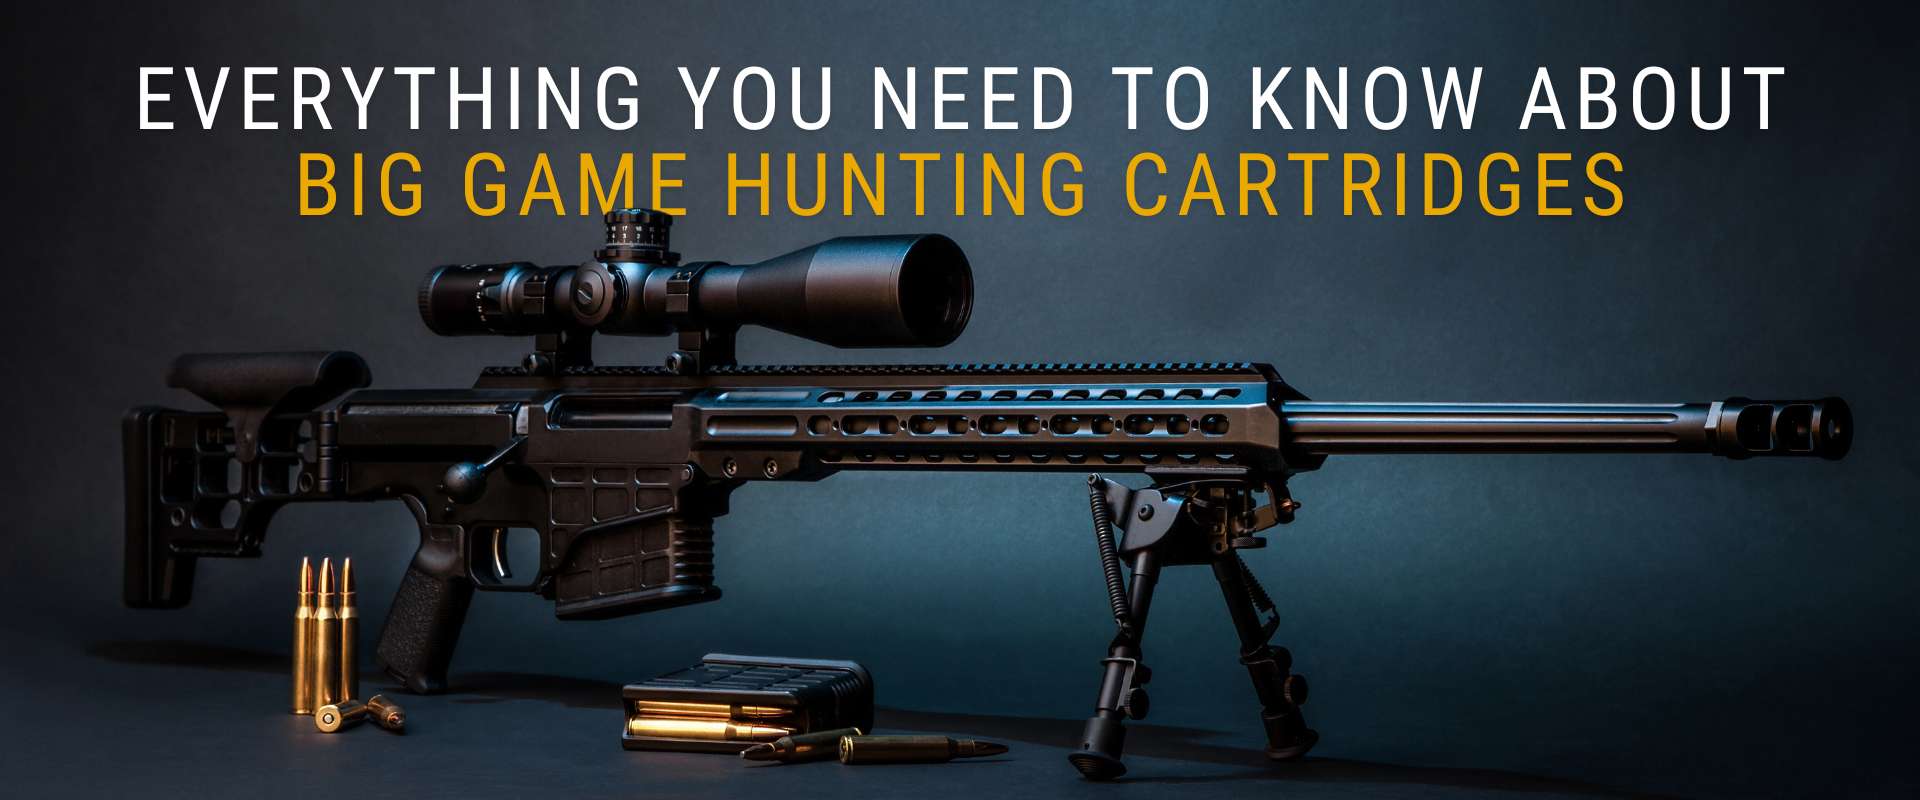 Everything You Need To Know About Big Game Hunting Cartridges